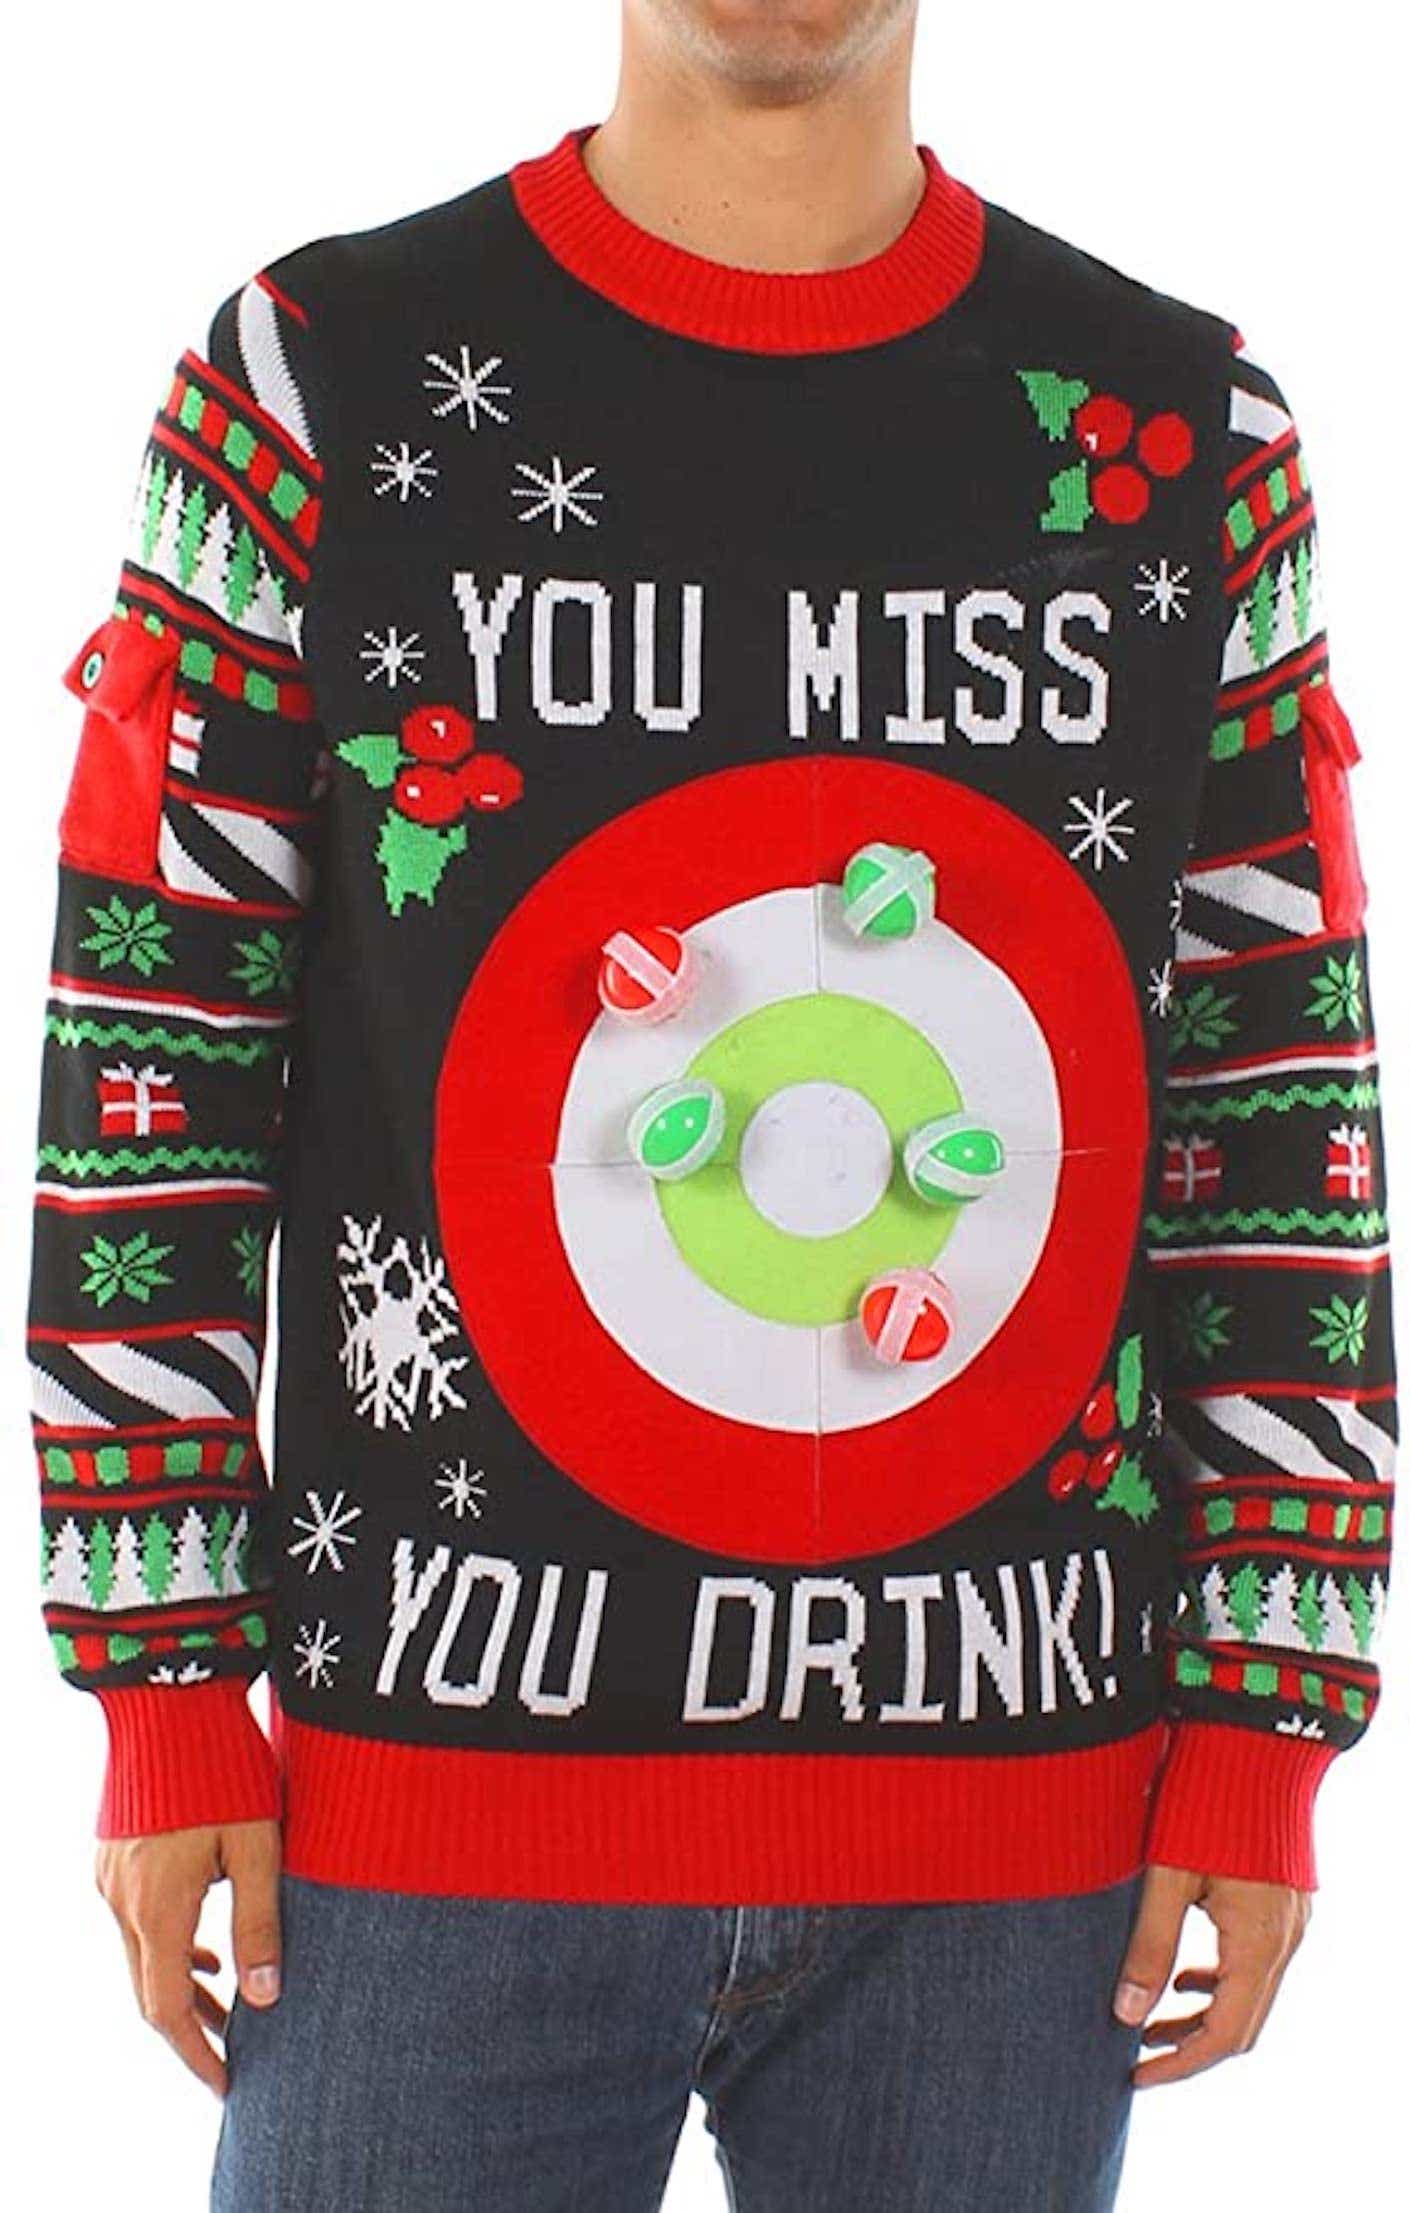 You miss you drink funny ugly sweater